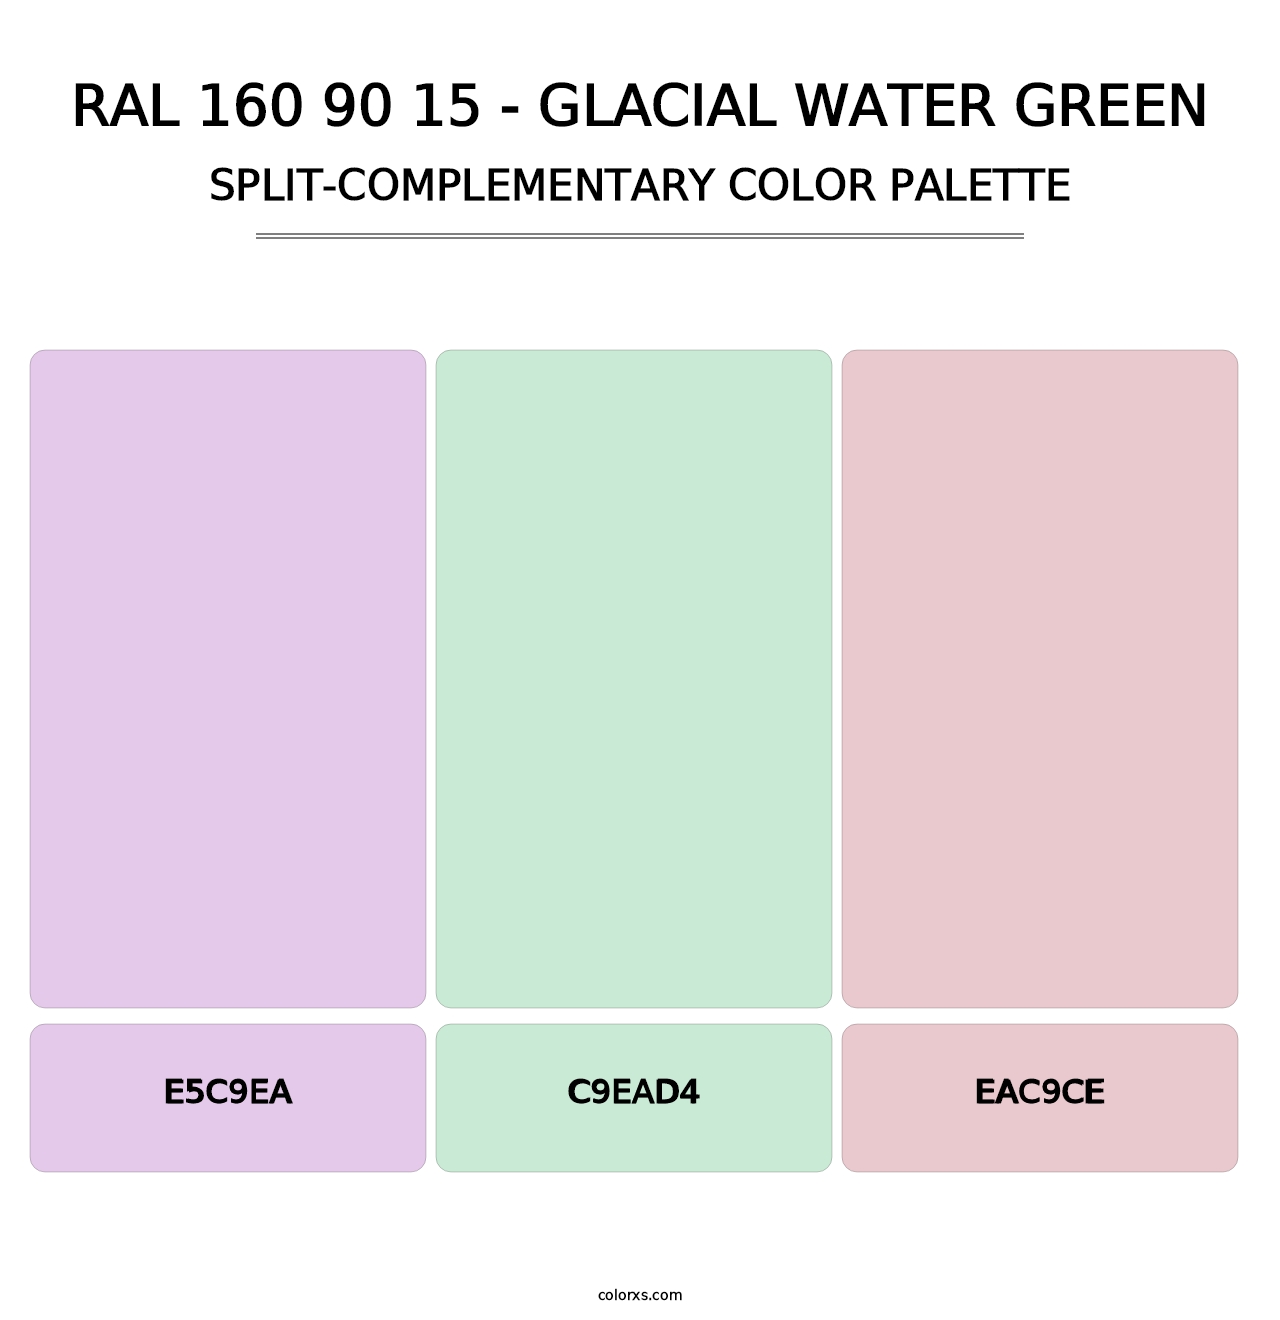 RAL 160 90 15 - Glacial Water Green - Split-Complementary Color Palette